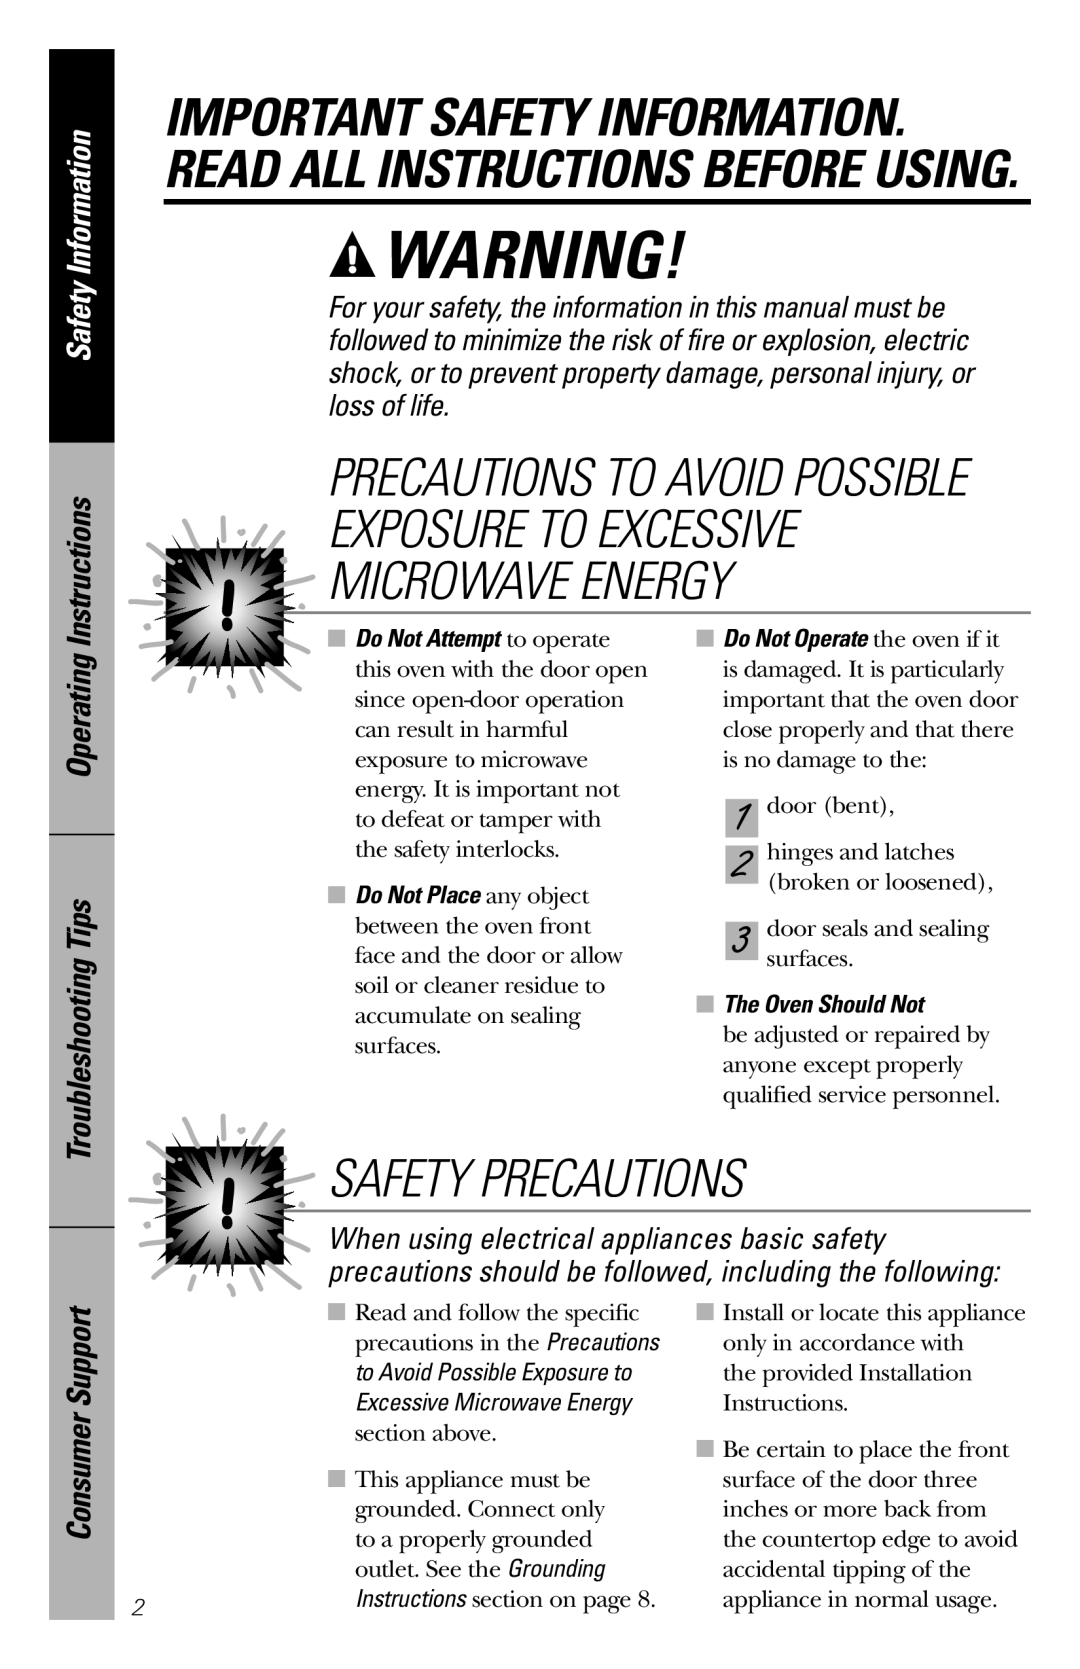 GE JES1136 Safety Precautions, Important Safety Information. Read All Instructions Before Using, Consumer Support 